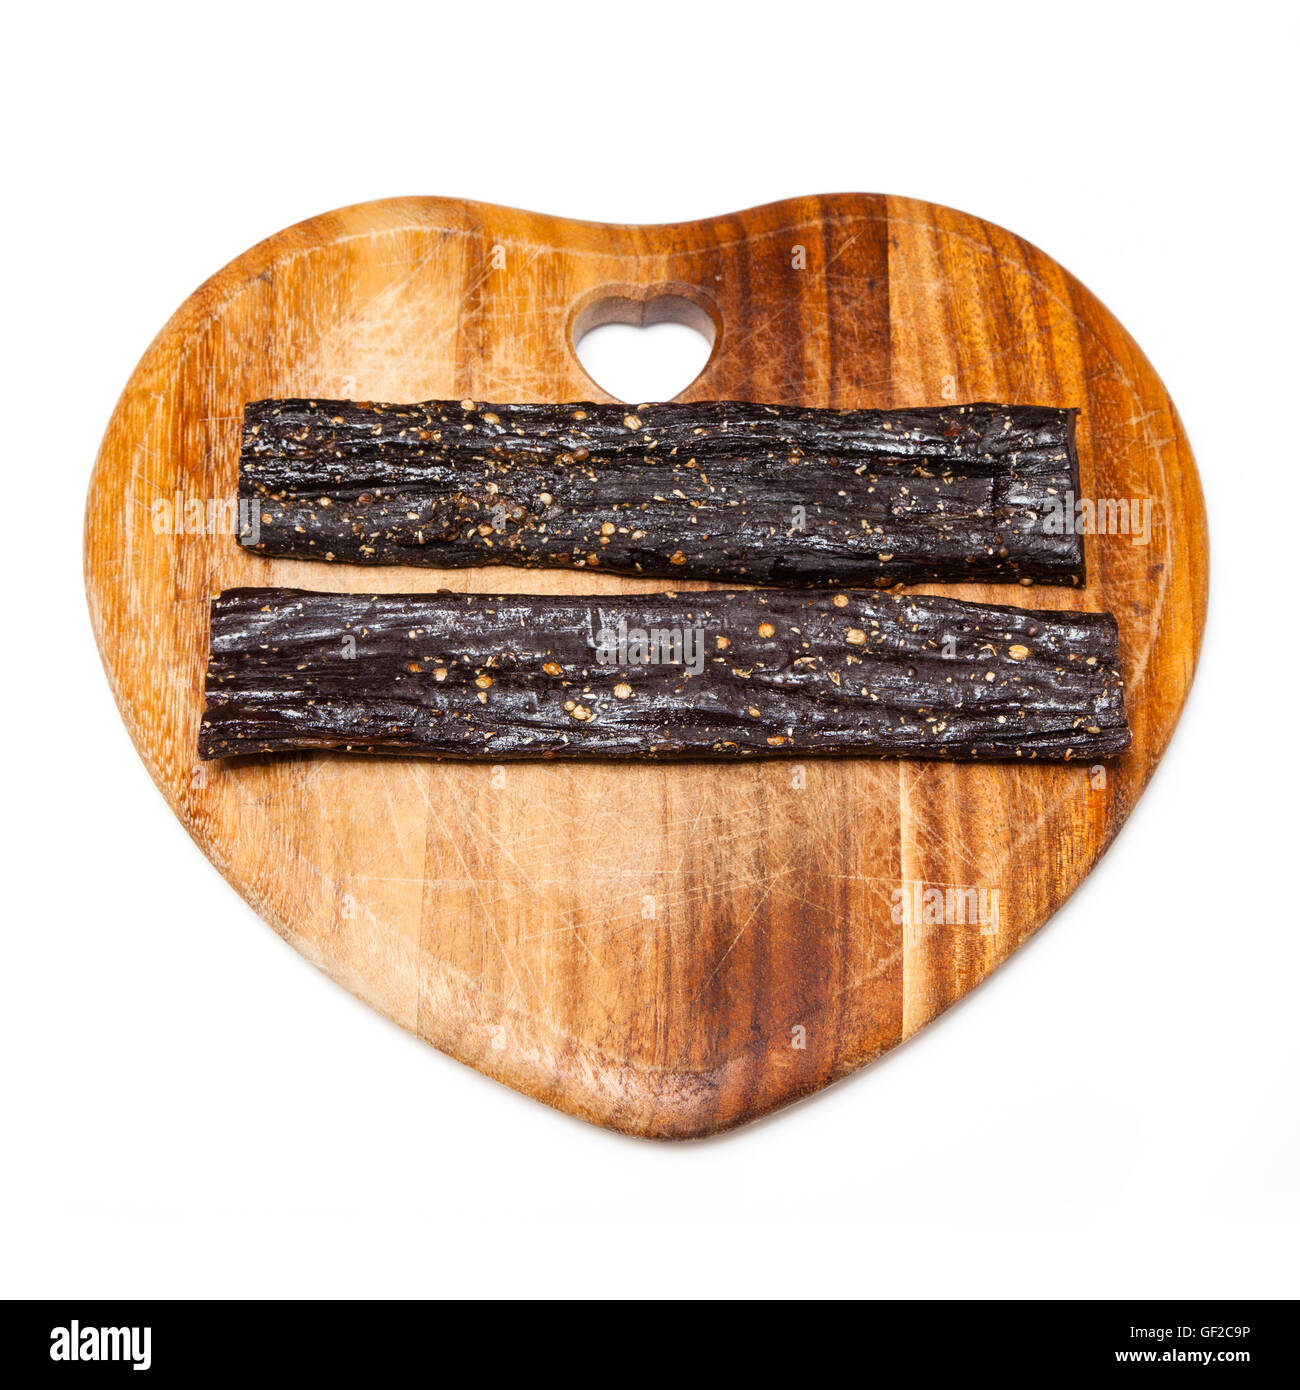 Beef Biltong , South African beef jerky on a wooden chopping board. Stock Photo